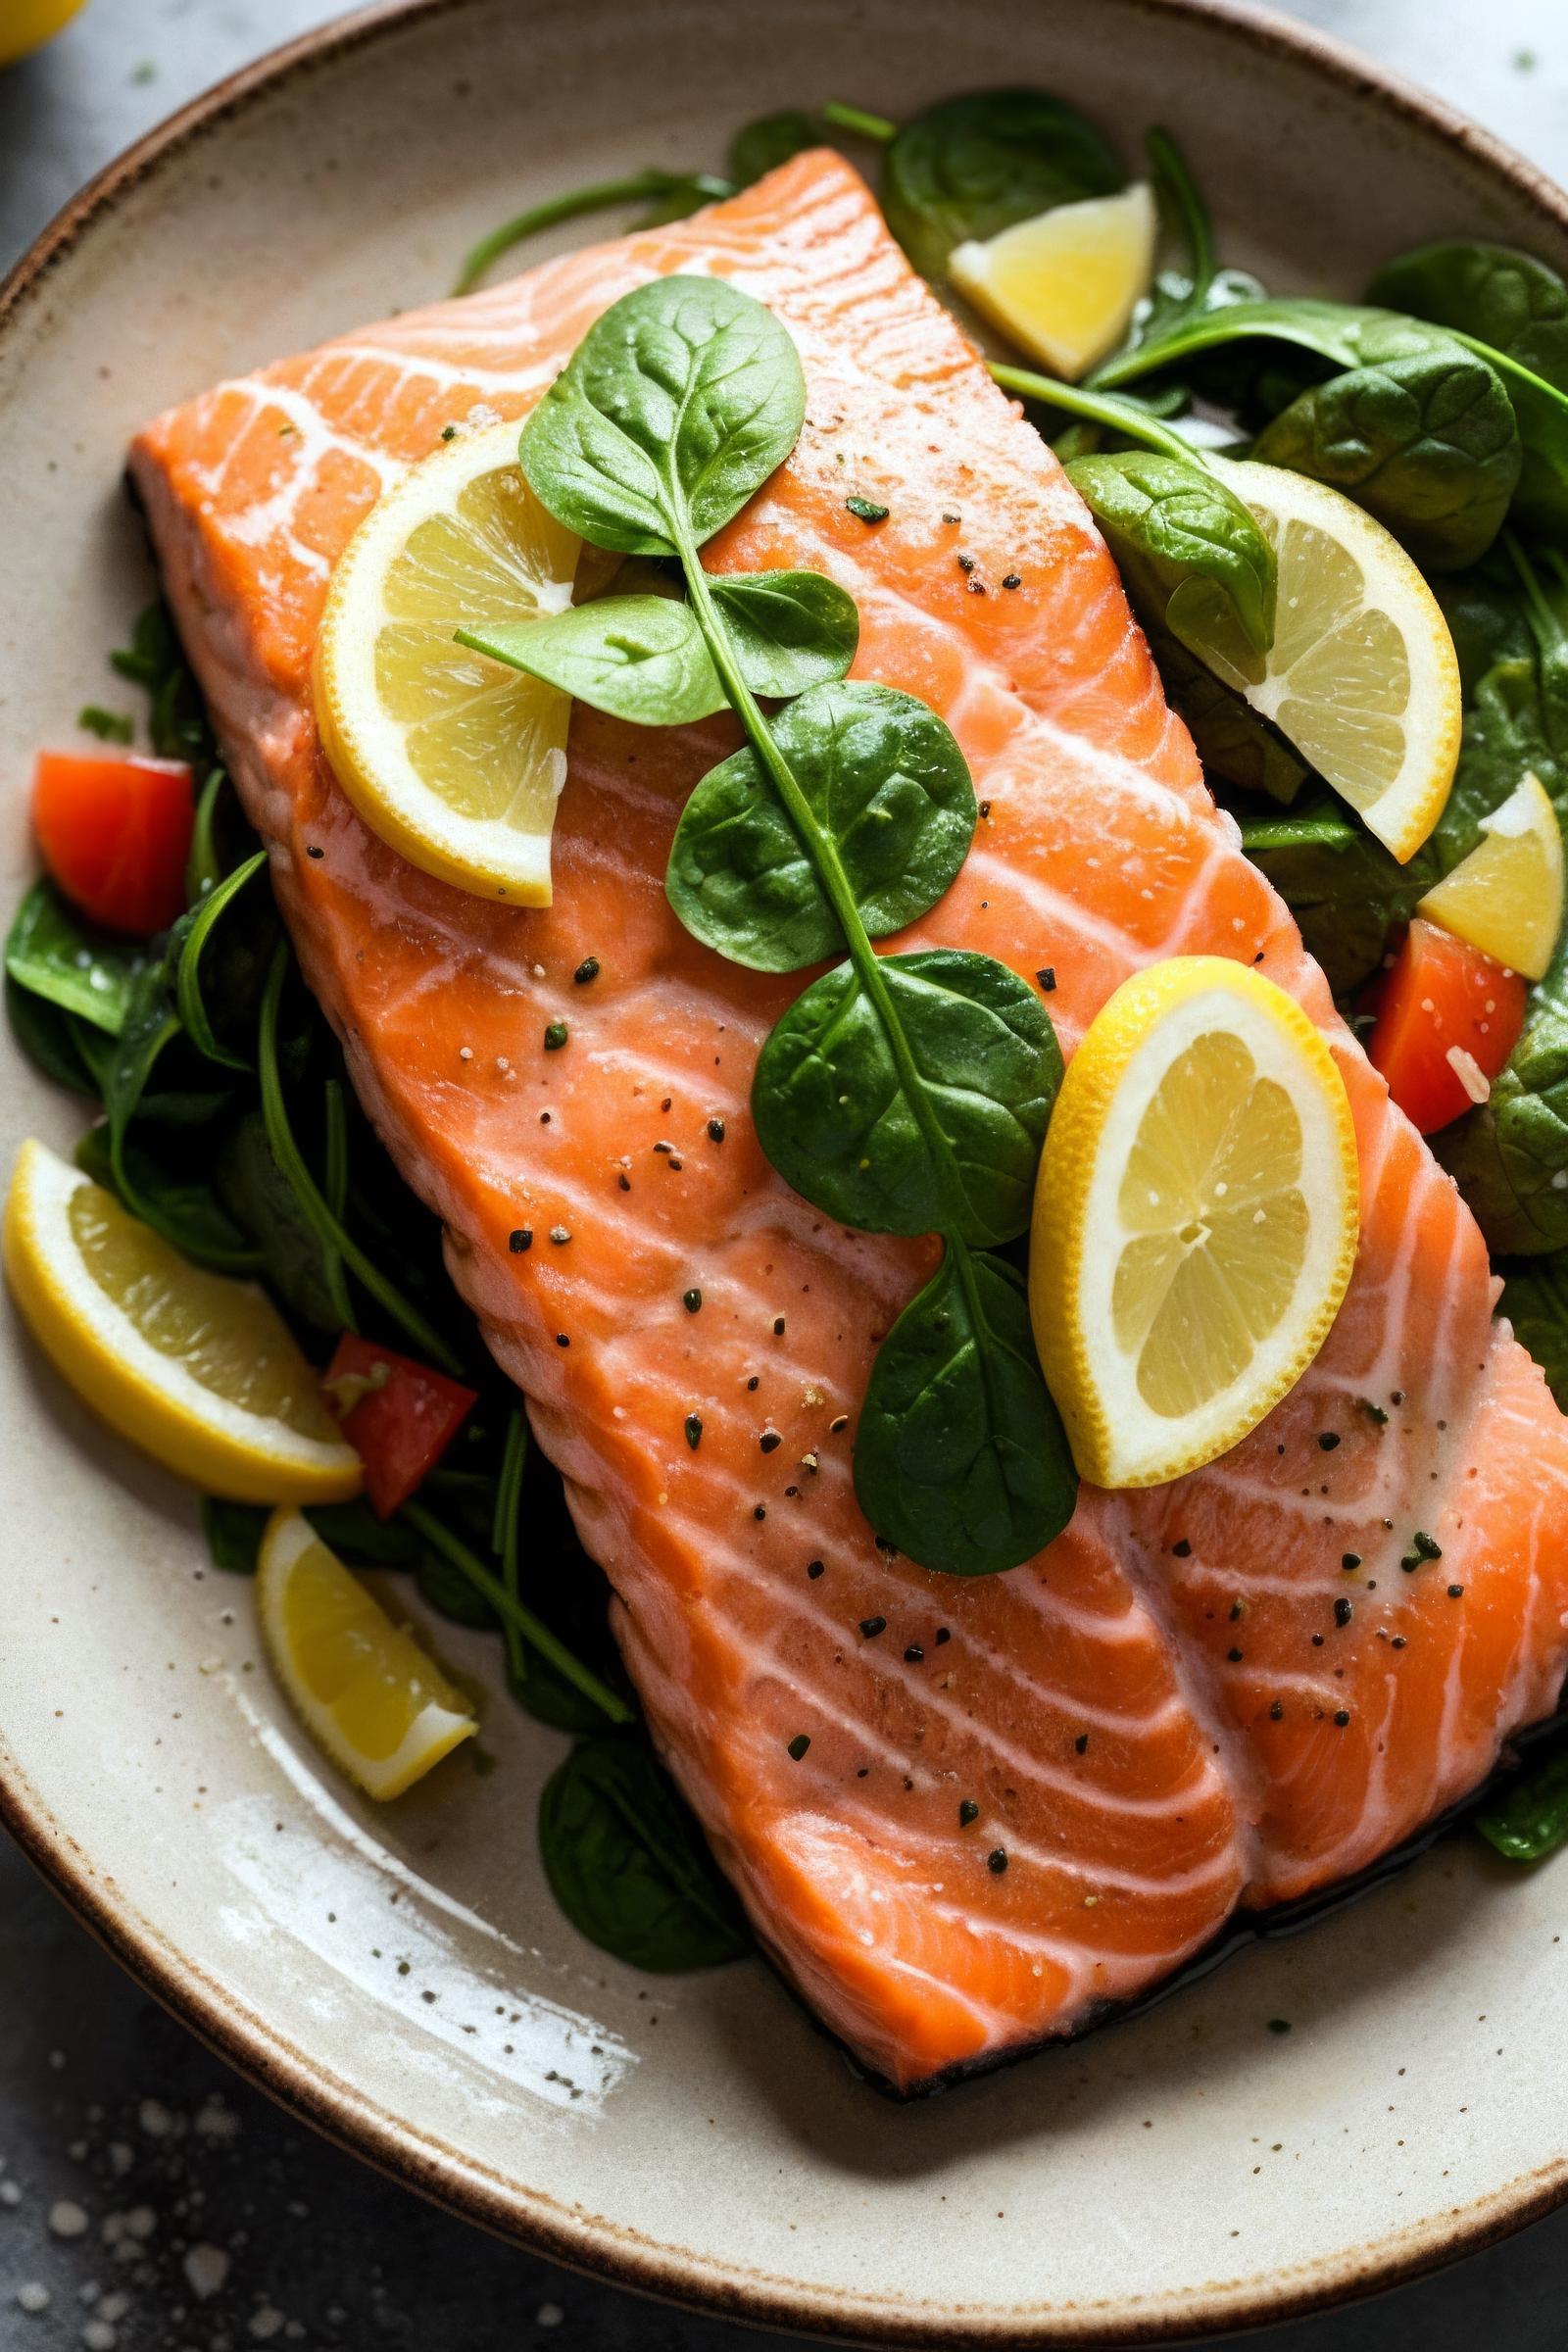 A close-up of a grilled salmon dish with lemon and herbs.